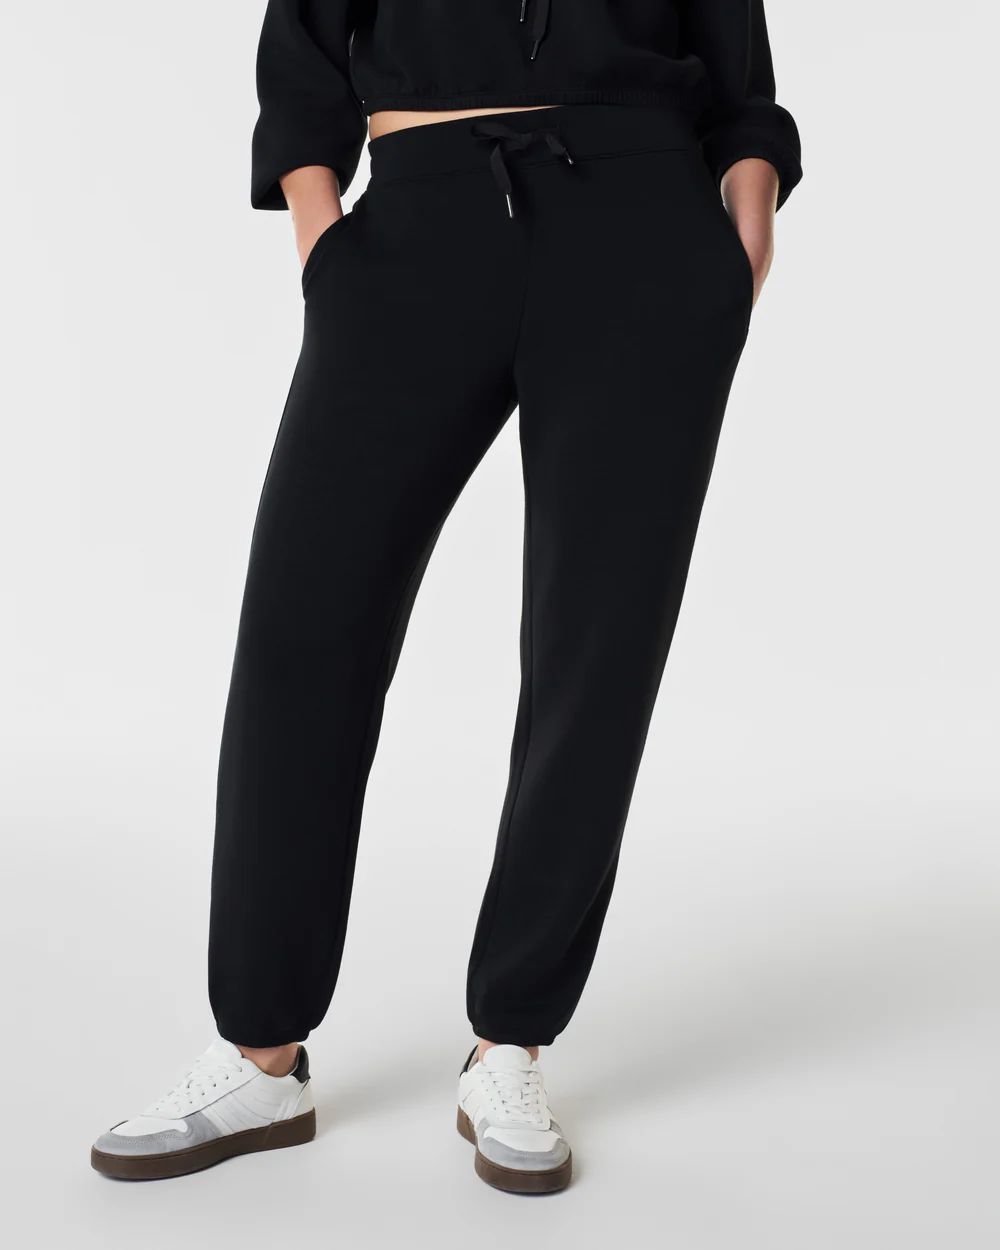 AirEssentials Jogger Pant | Spanx